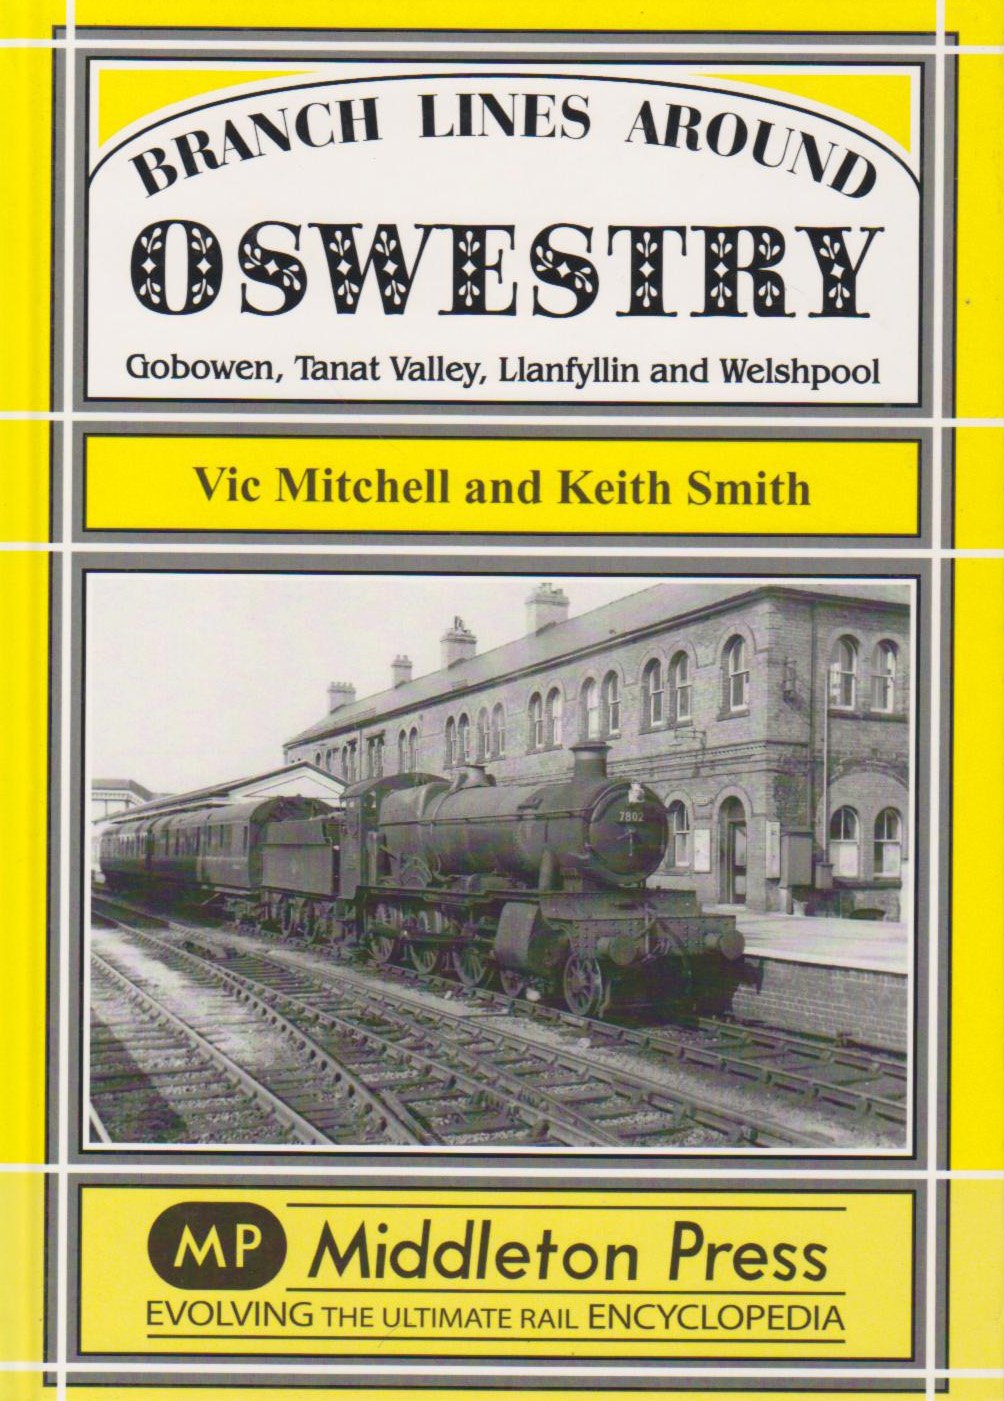 Branch Lines around Oswestry Gobowen, Tanat Valley, Llanfyllin and Welshpool